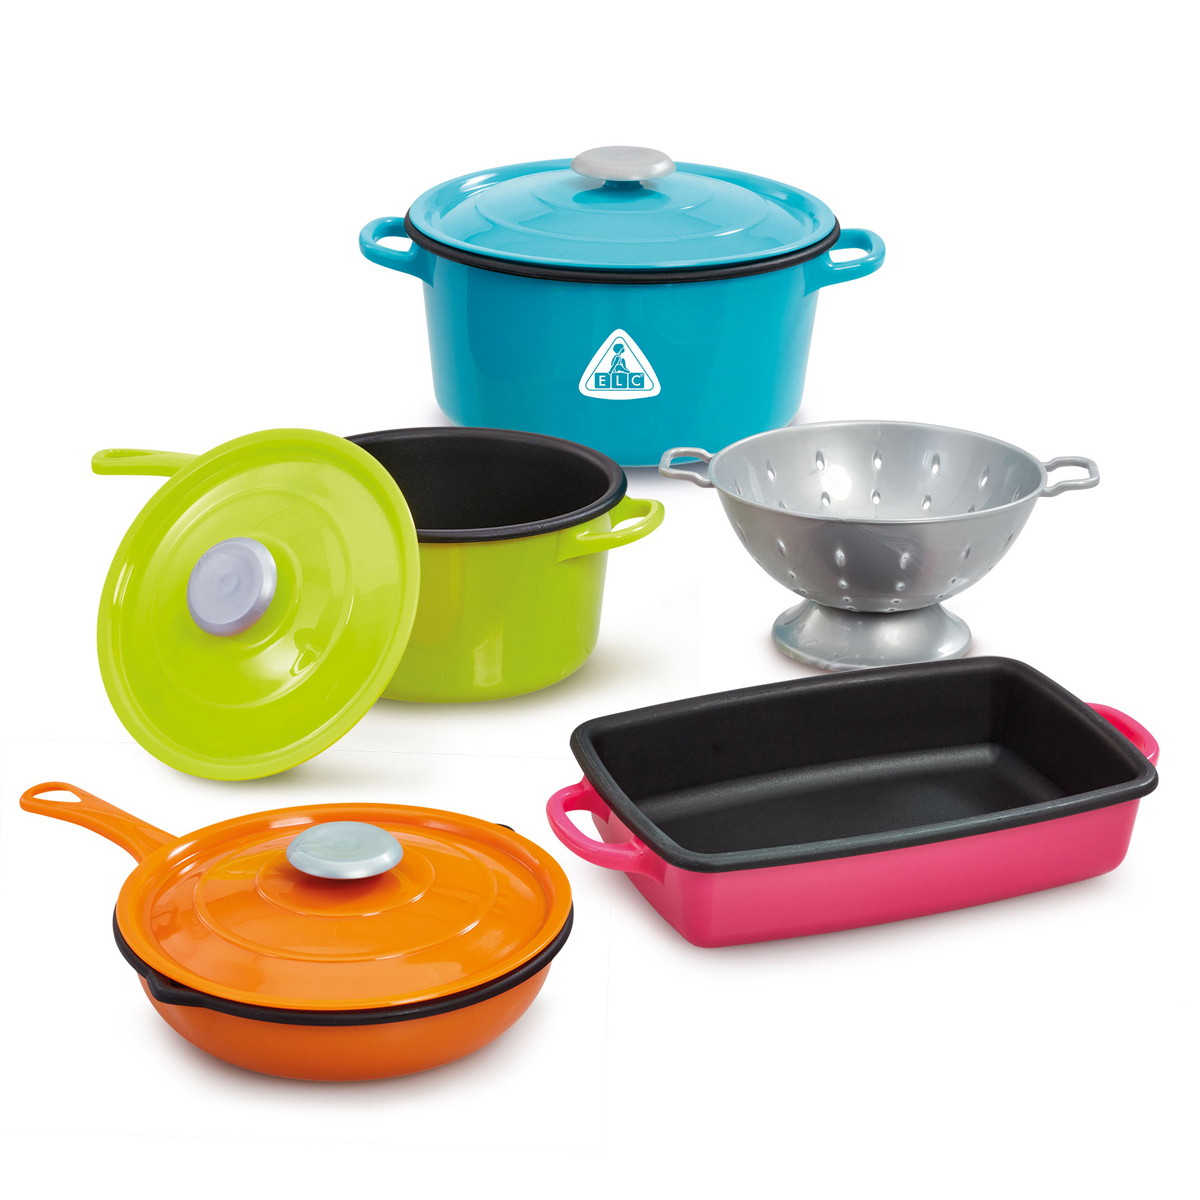 Early Learning Centre Pots & Pans Playset | Early Learning Centre